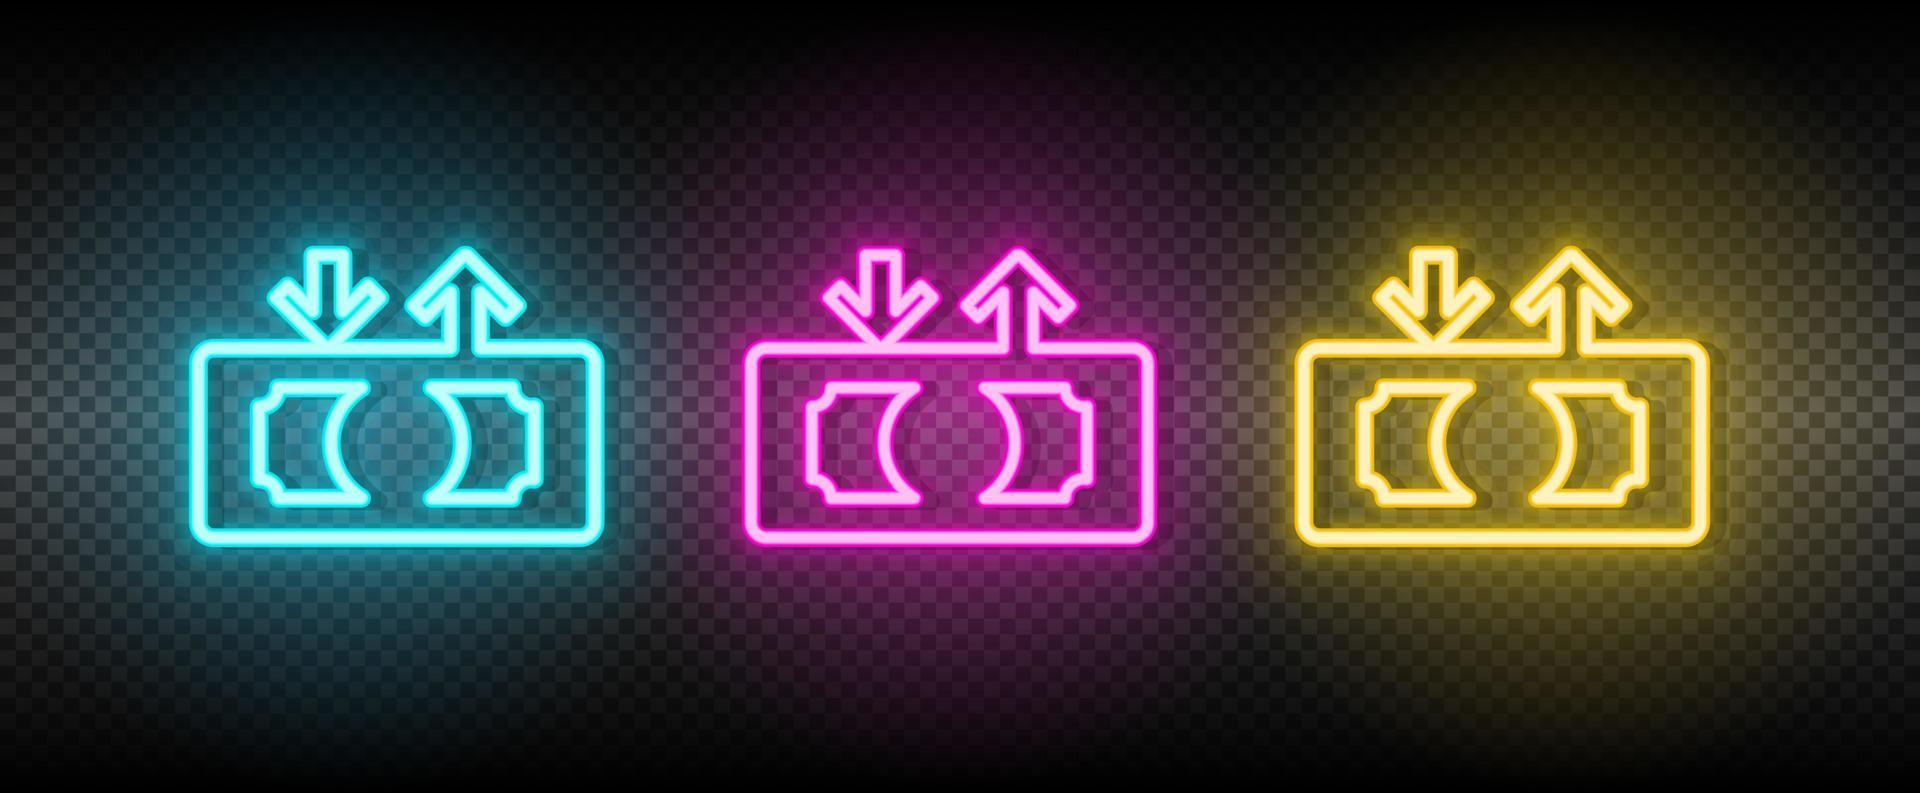 cashing, cash out, money neon vector icon. Illustration neon blue, yellow, red icon set